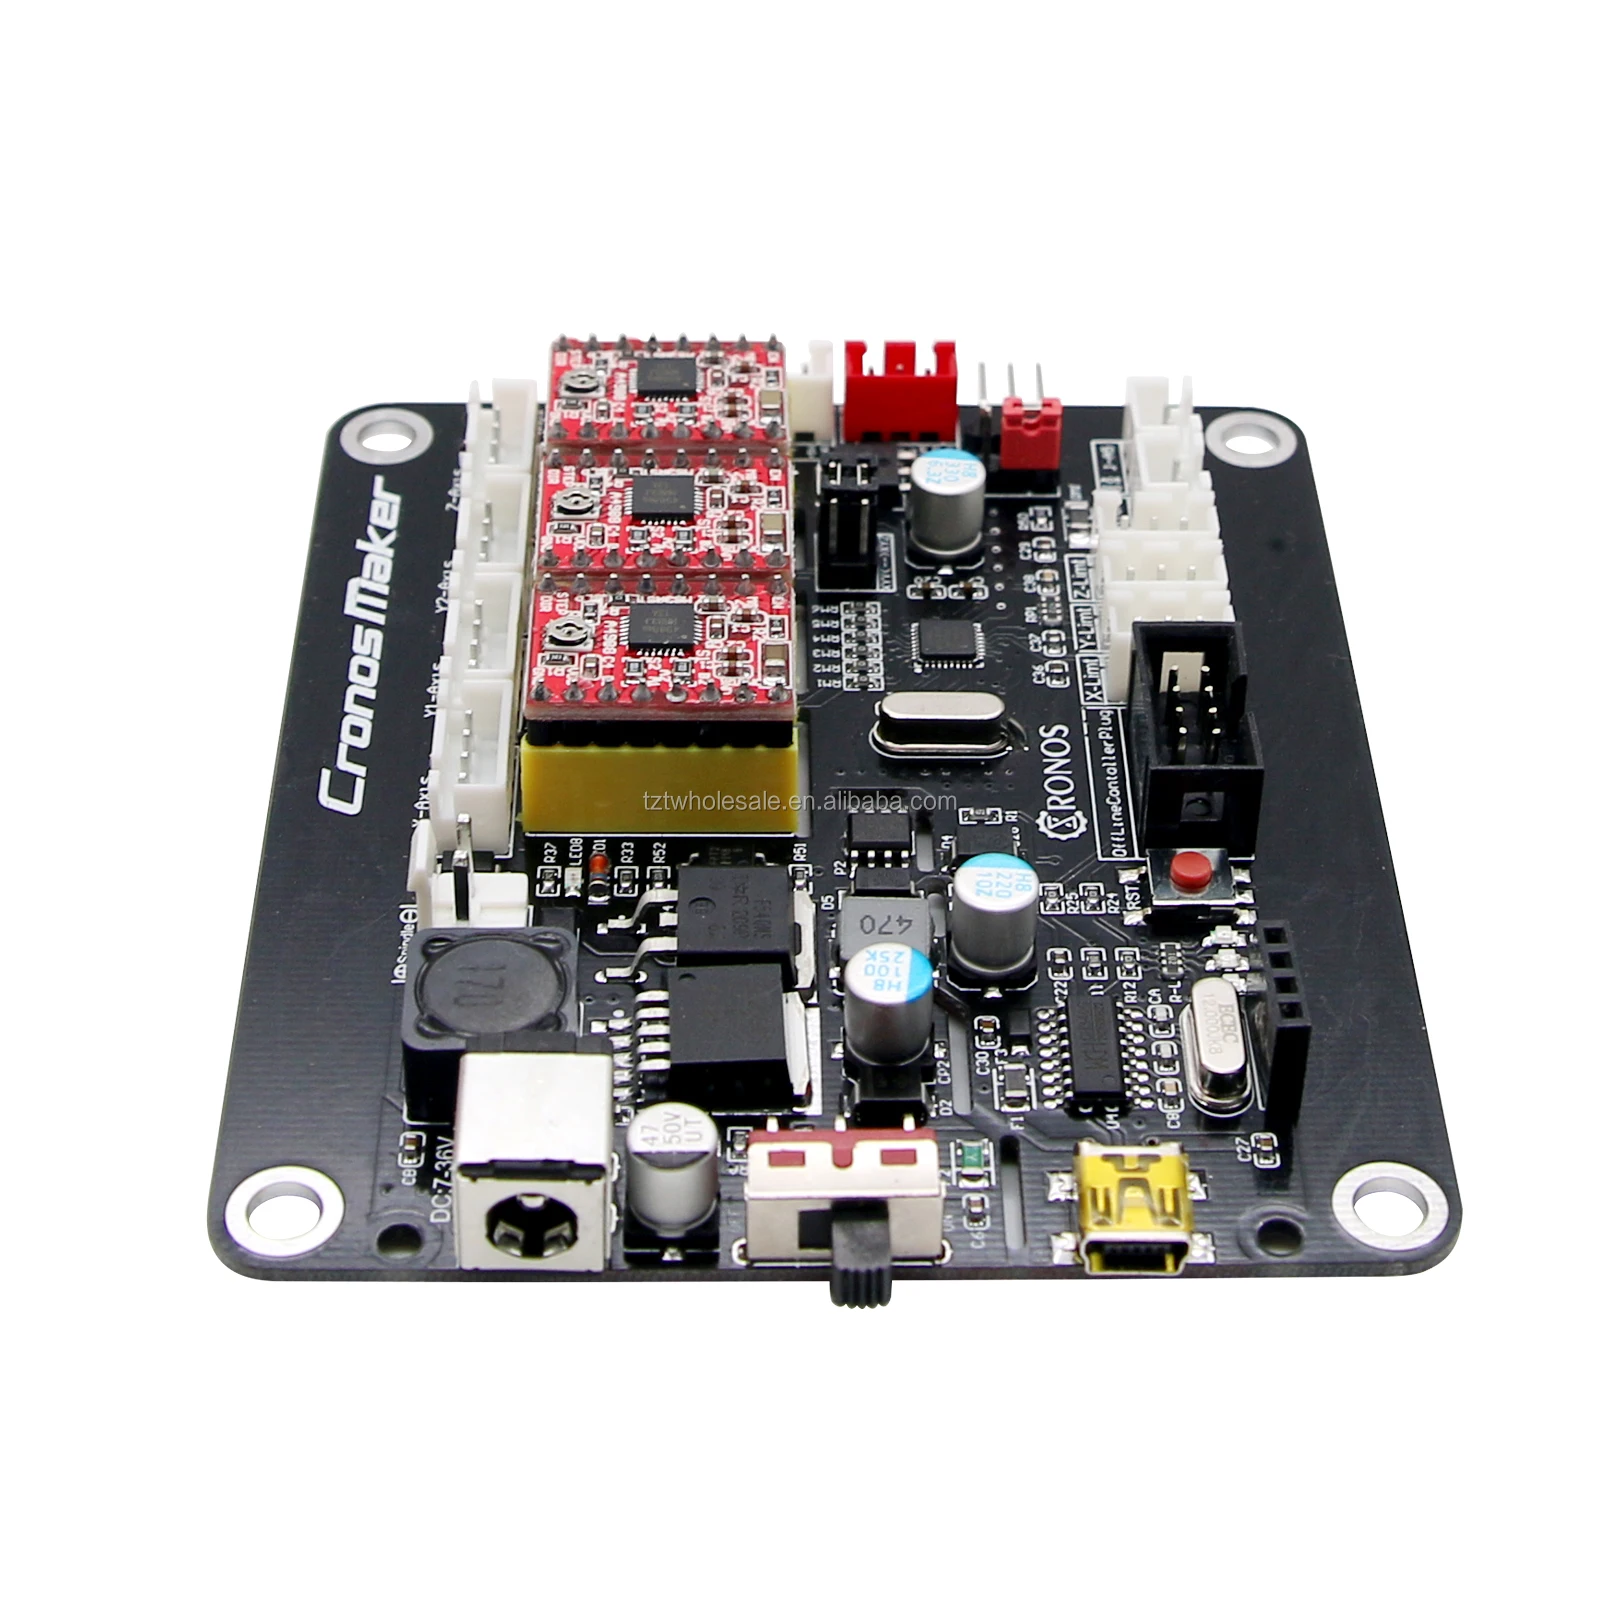 CNC 3 Axis Control Board Version 4.0 GRBL Support 2P/3P Laser PWM for Engraving 